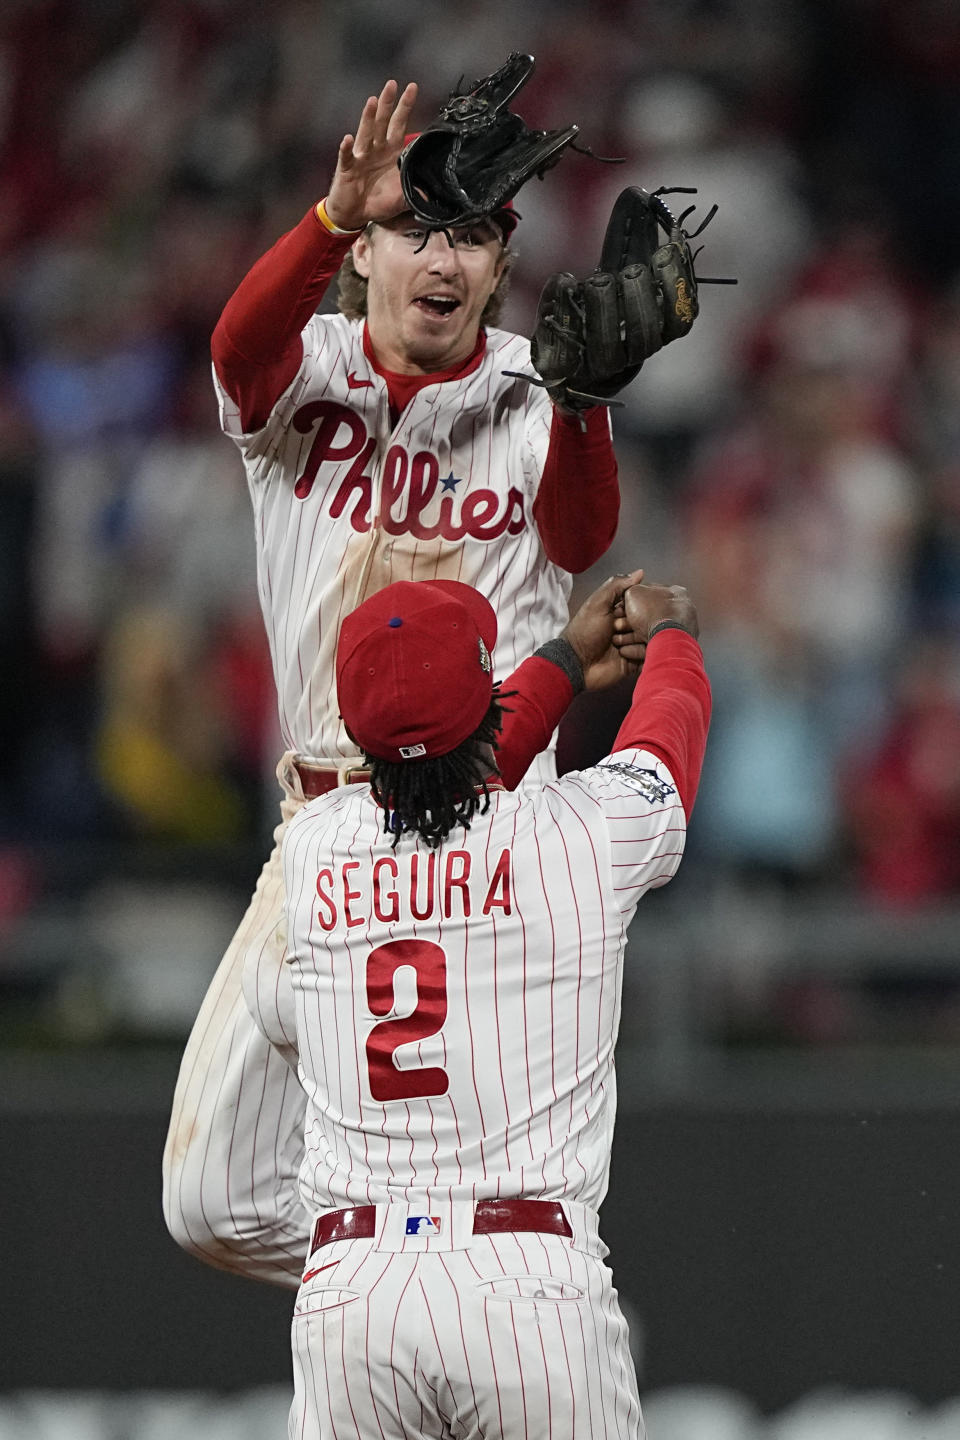 Philadelphia Phillies shortstop Bryson Stott and second baseman Jean Segura celebrate their win in Game 3 of baseball's World Series between the Houston Astros and the Philadelphia Phillies on Tuesday, Nov. 1, 2022, in Philadelphia. The Phillies won 7-0 to take one game lead in the best of seven series. (AP Photo/David J. Phillip)